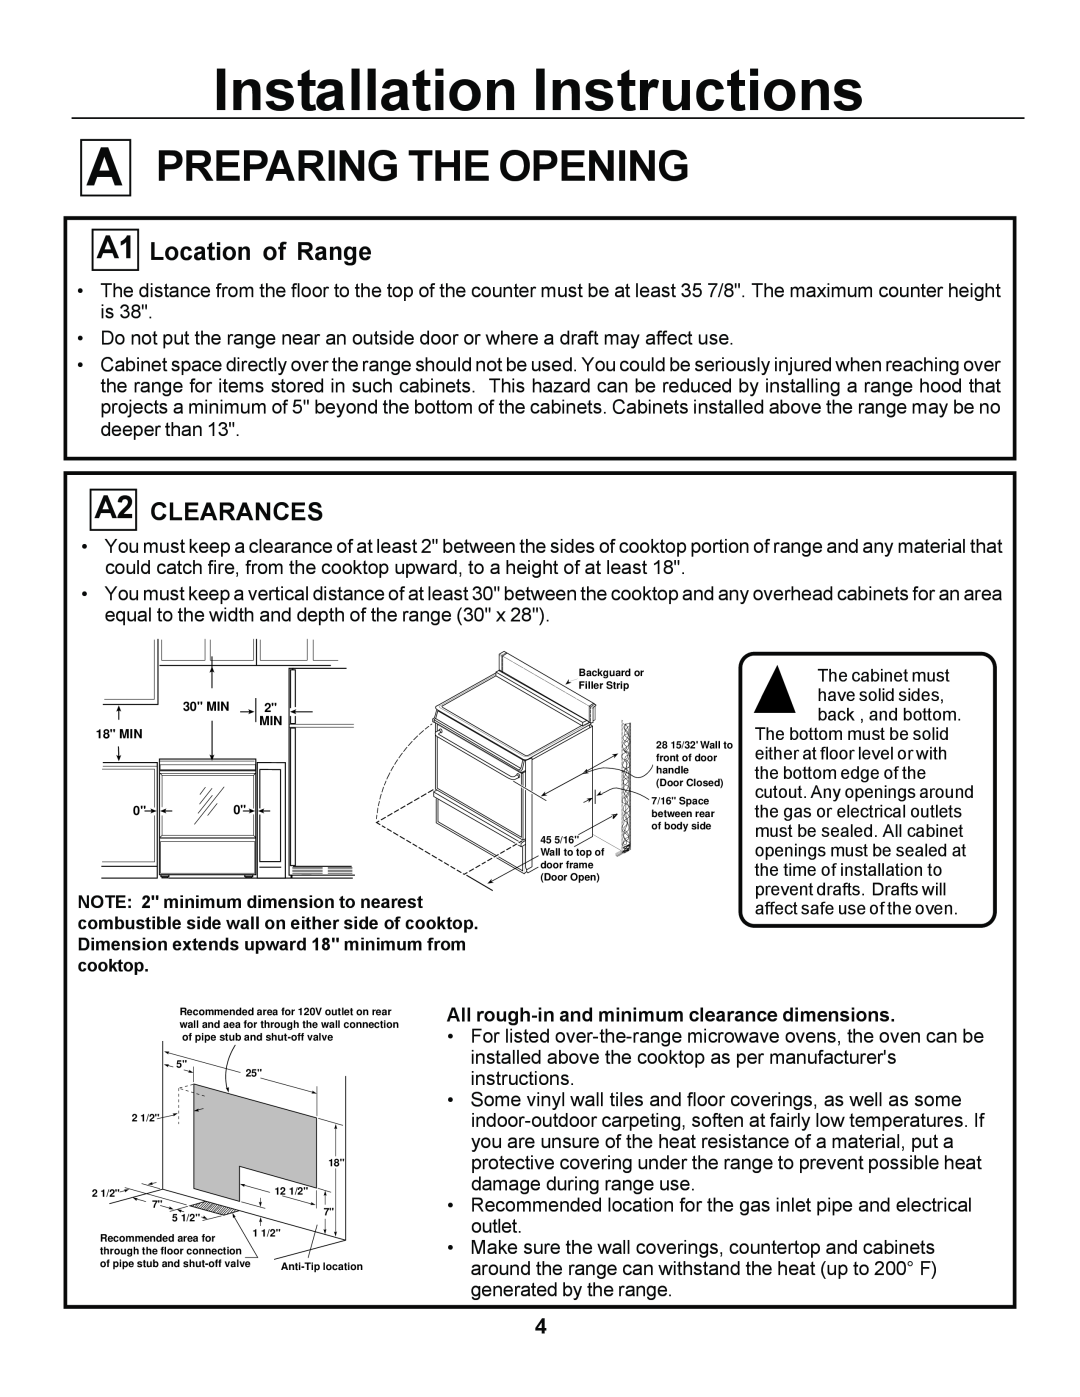 GE JGSP44, JGSP23 manual Preparing The Opening, Location of Range, Clearances, Installation Instructions 